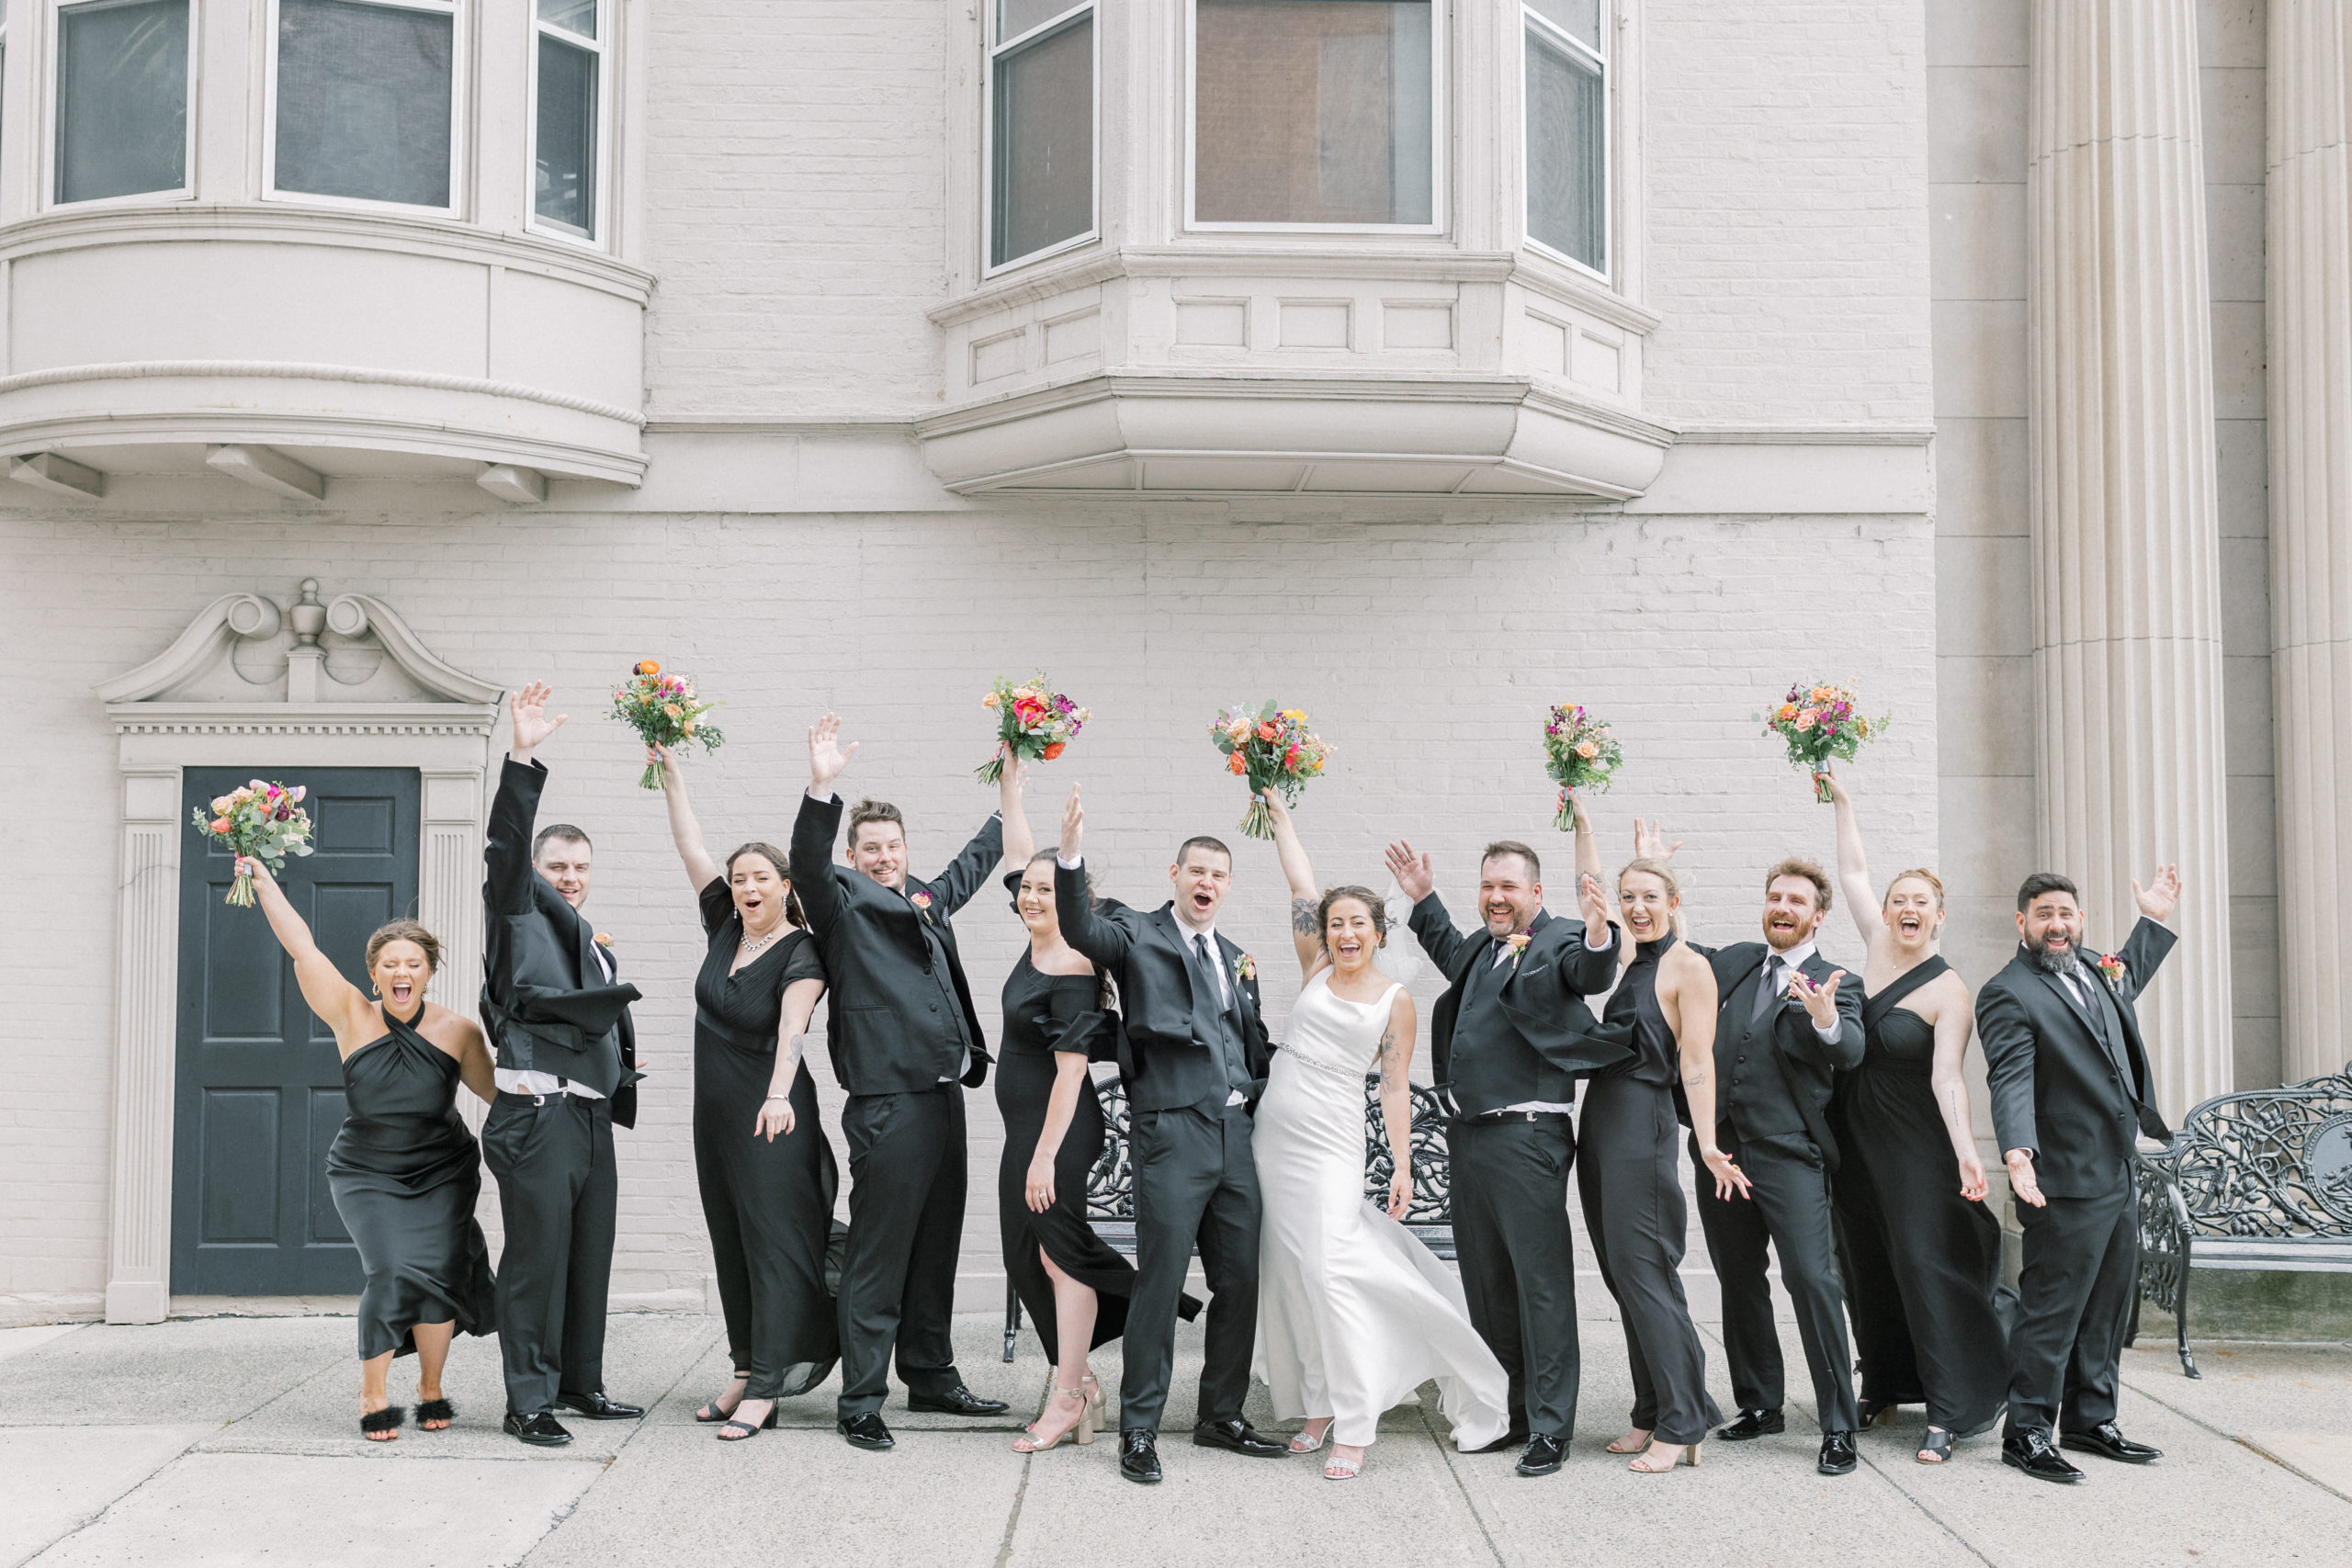 A bridal party at a wedding throwing their hands up in the air in celebration of the Bride and groom who just got married. They are all wearing black dresses and black suits with colorful wedding bouquets. This wedding took place at Franklin Plaza in Troy, NY and was photographed in a light and airy style. 